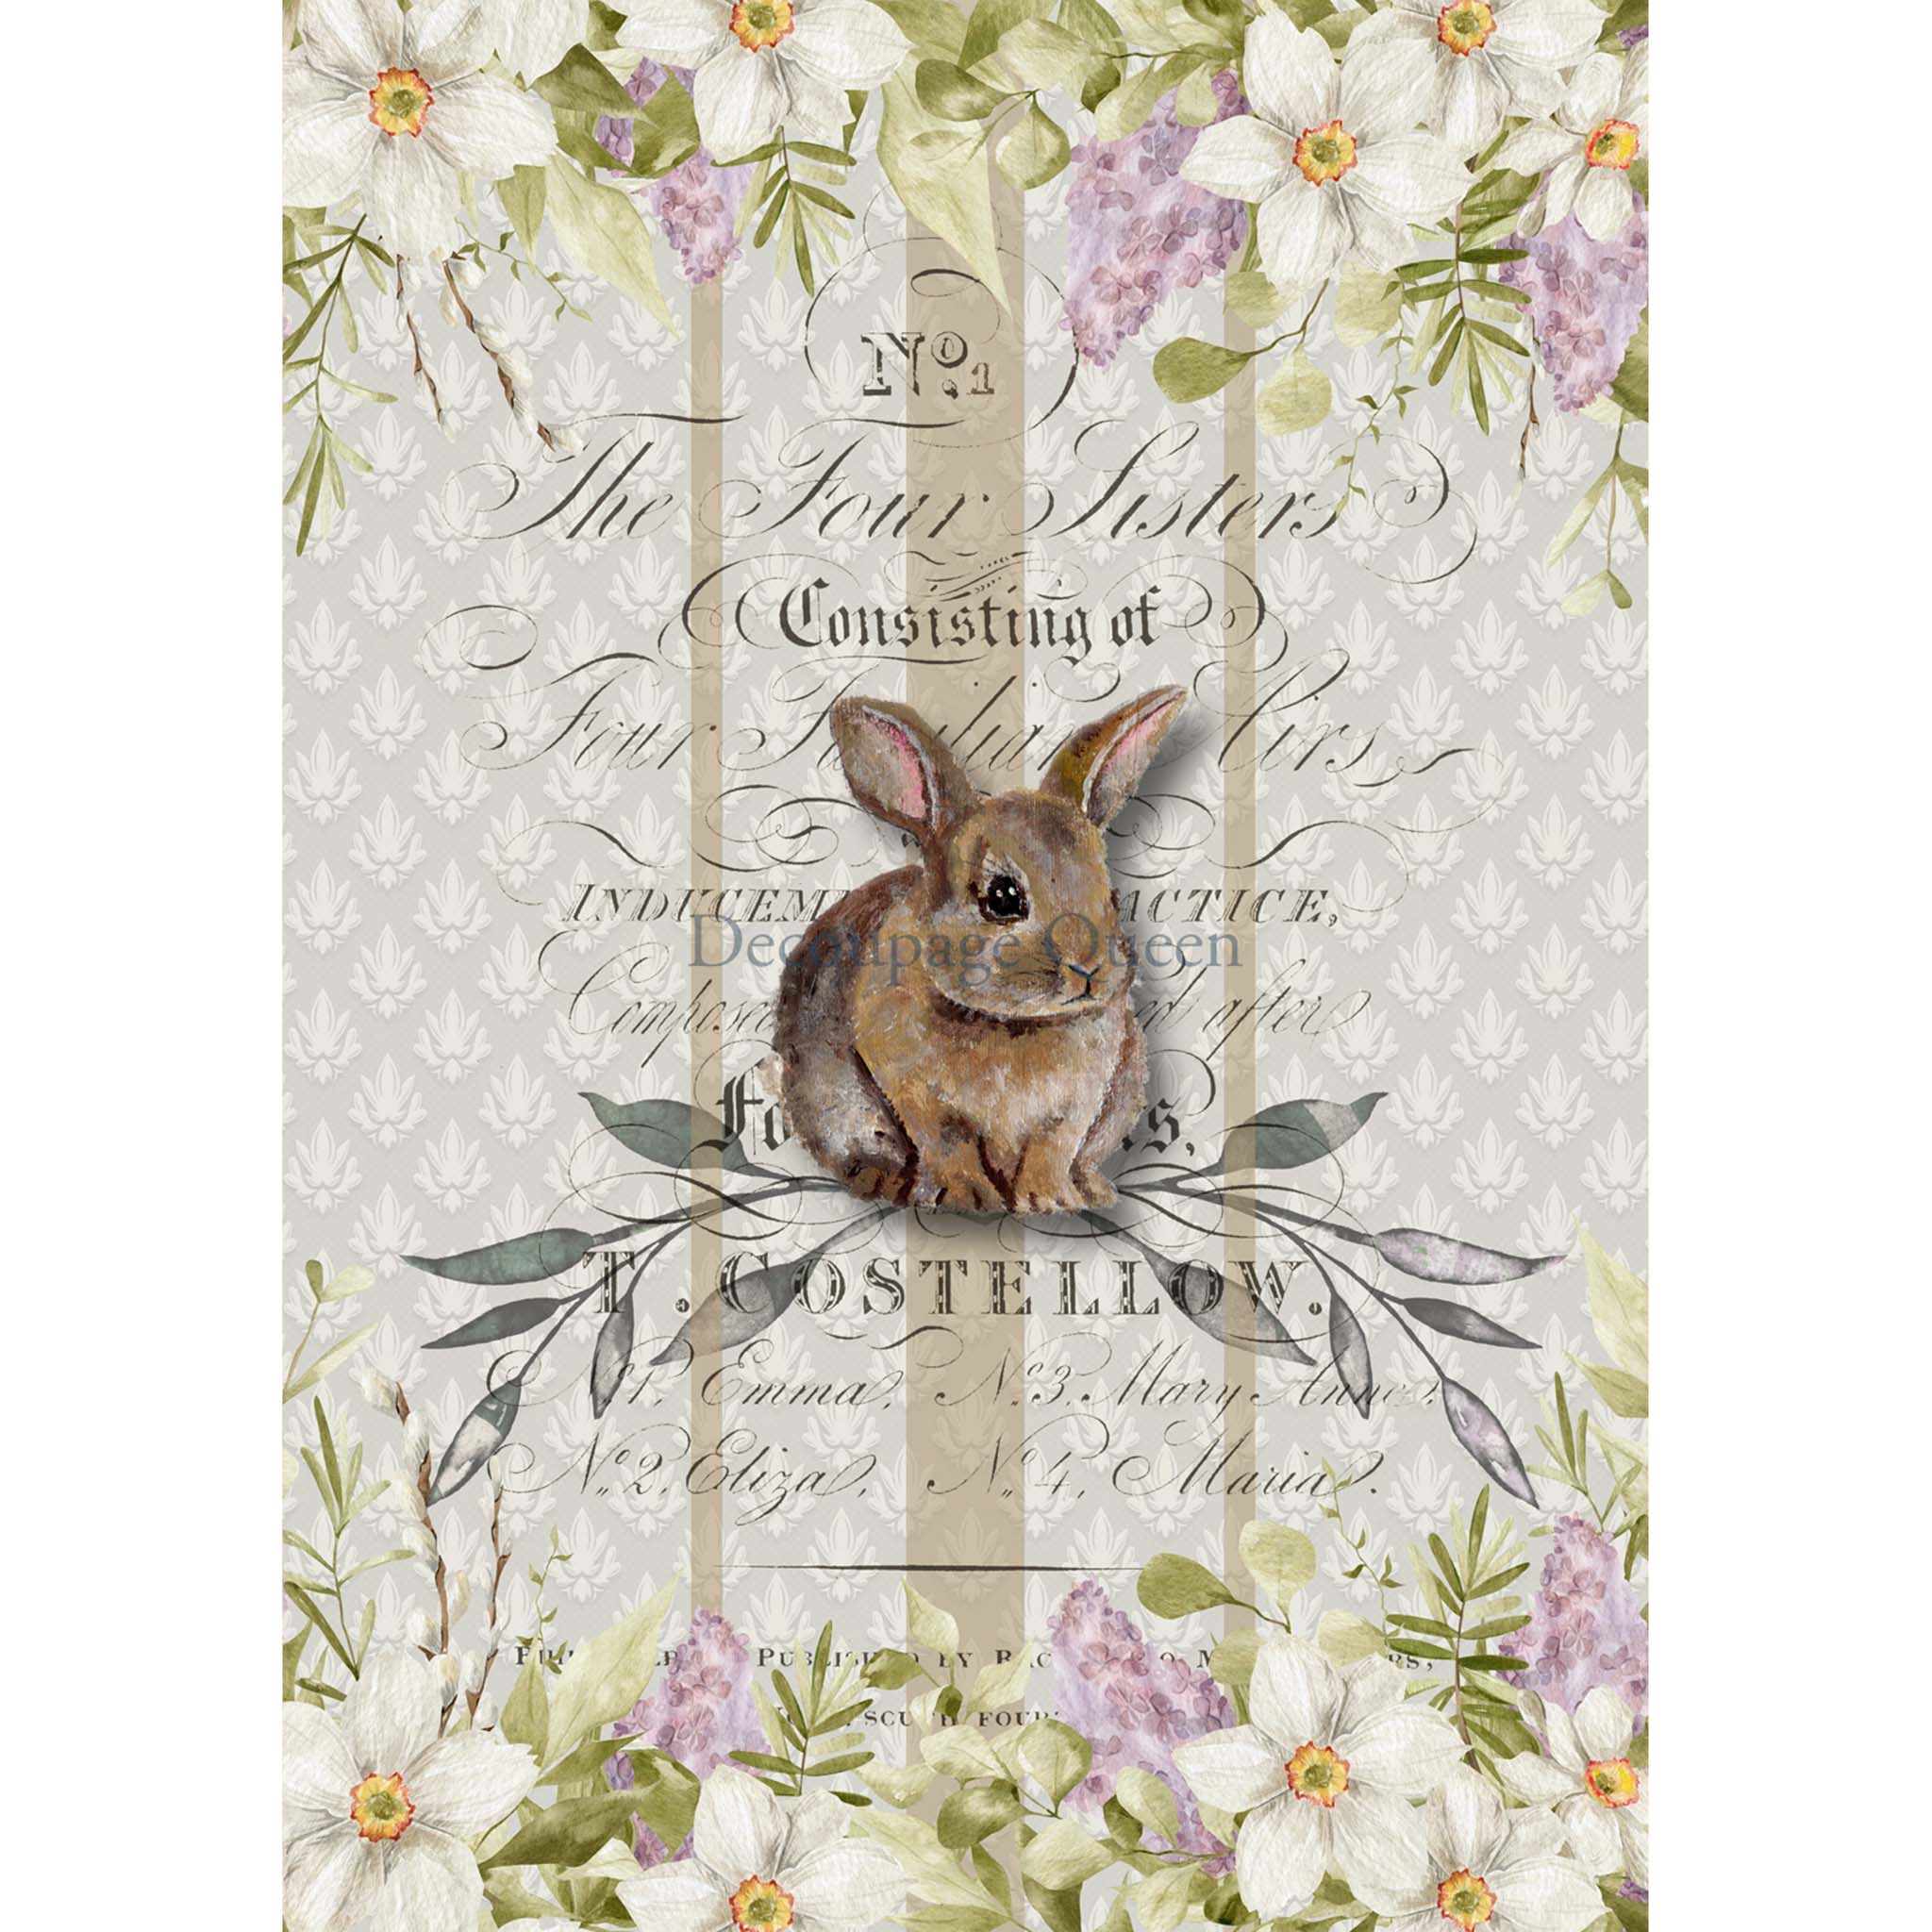 A3 rice paper design that features a charming bunny surrounded by beautiful flowers and elegant script with a repeating flourish pattern in the background. White borders are on the sides.